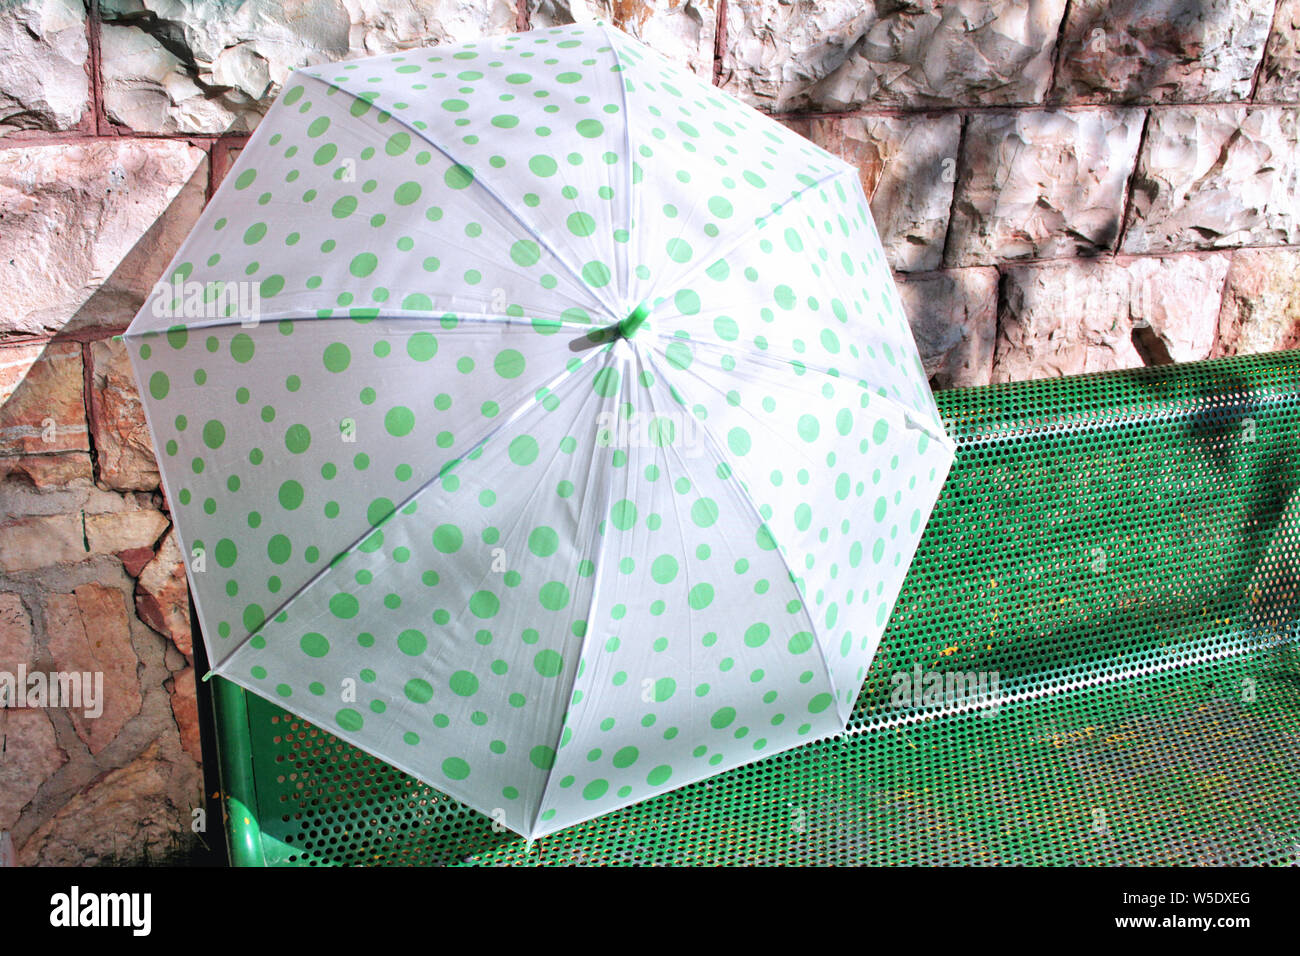 A cheerful green and white polka dot umbrella rests open on a green bench against a stone wall in Jerusalem Israel. Stock Photo